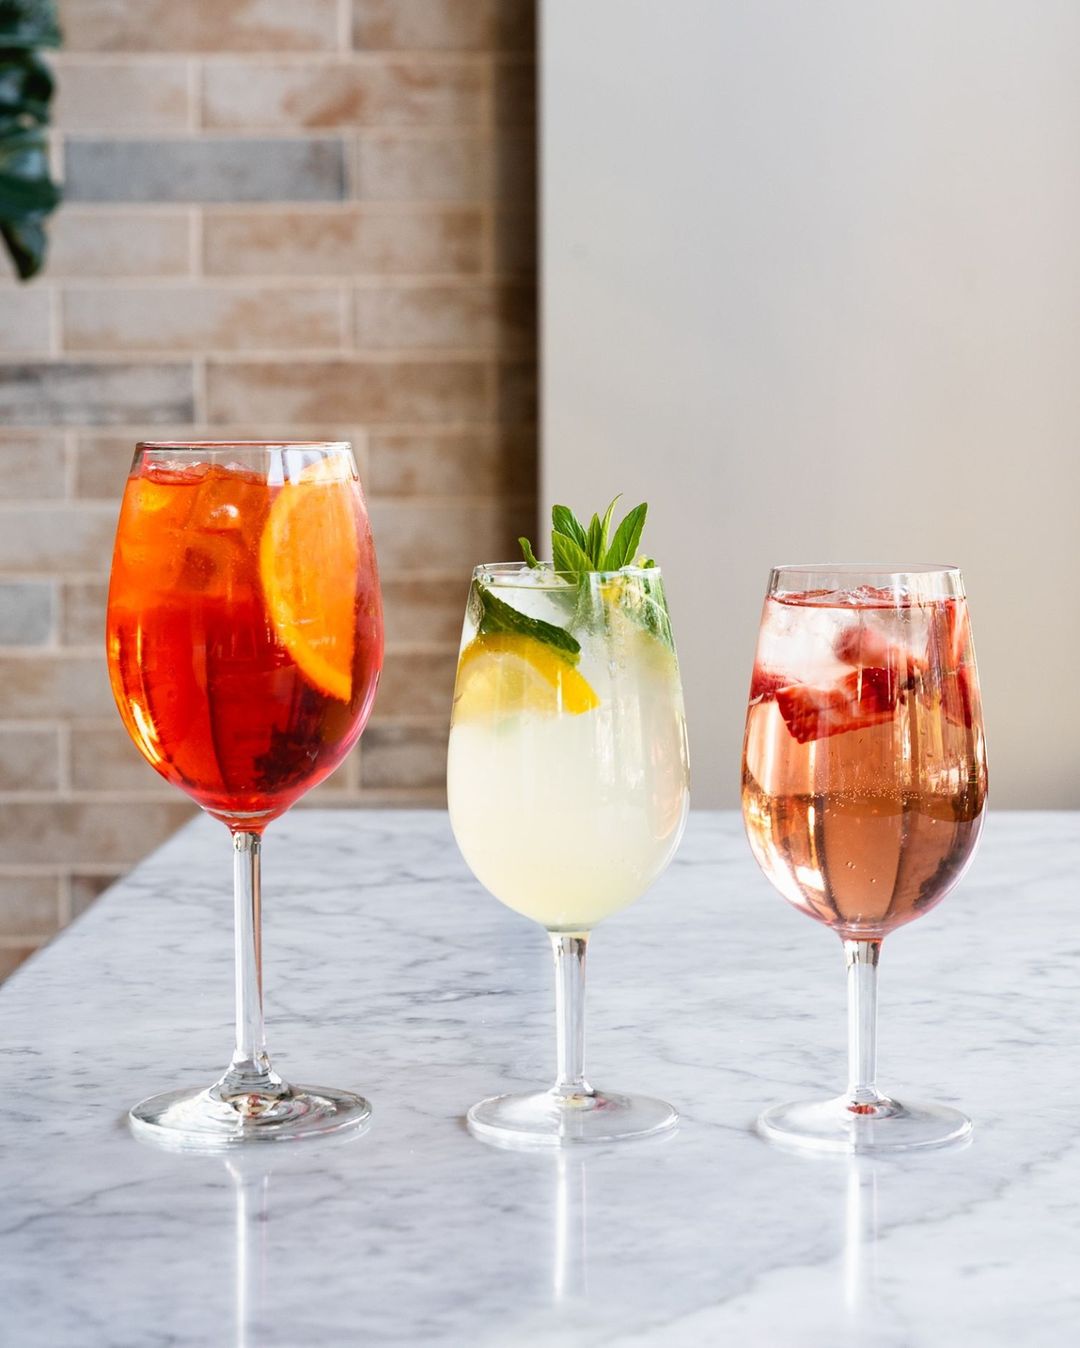 Fratelli Fresh Spritz Recipes To Try at Home This Festive Season ...